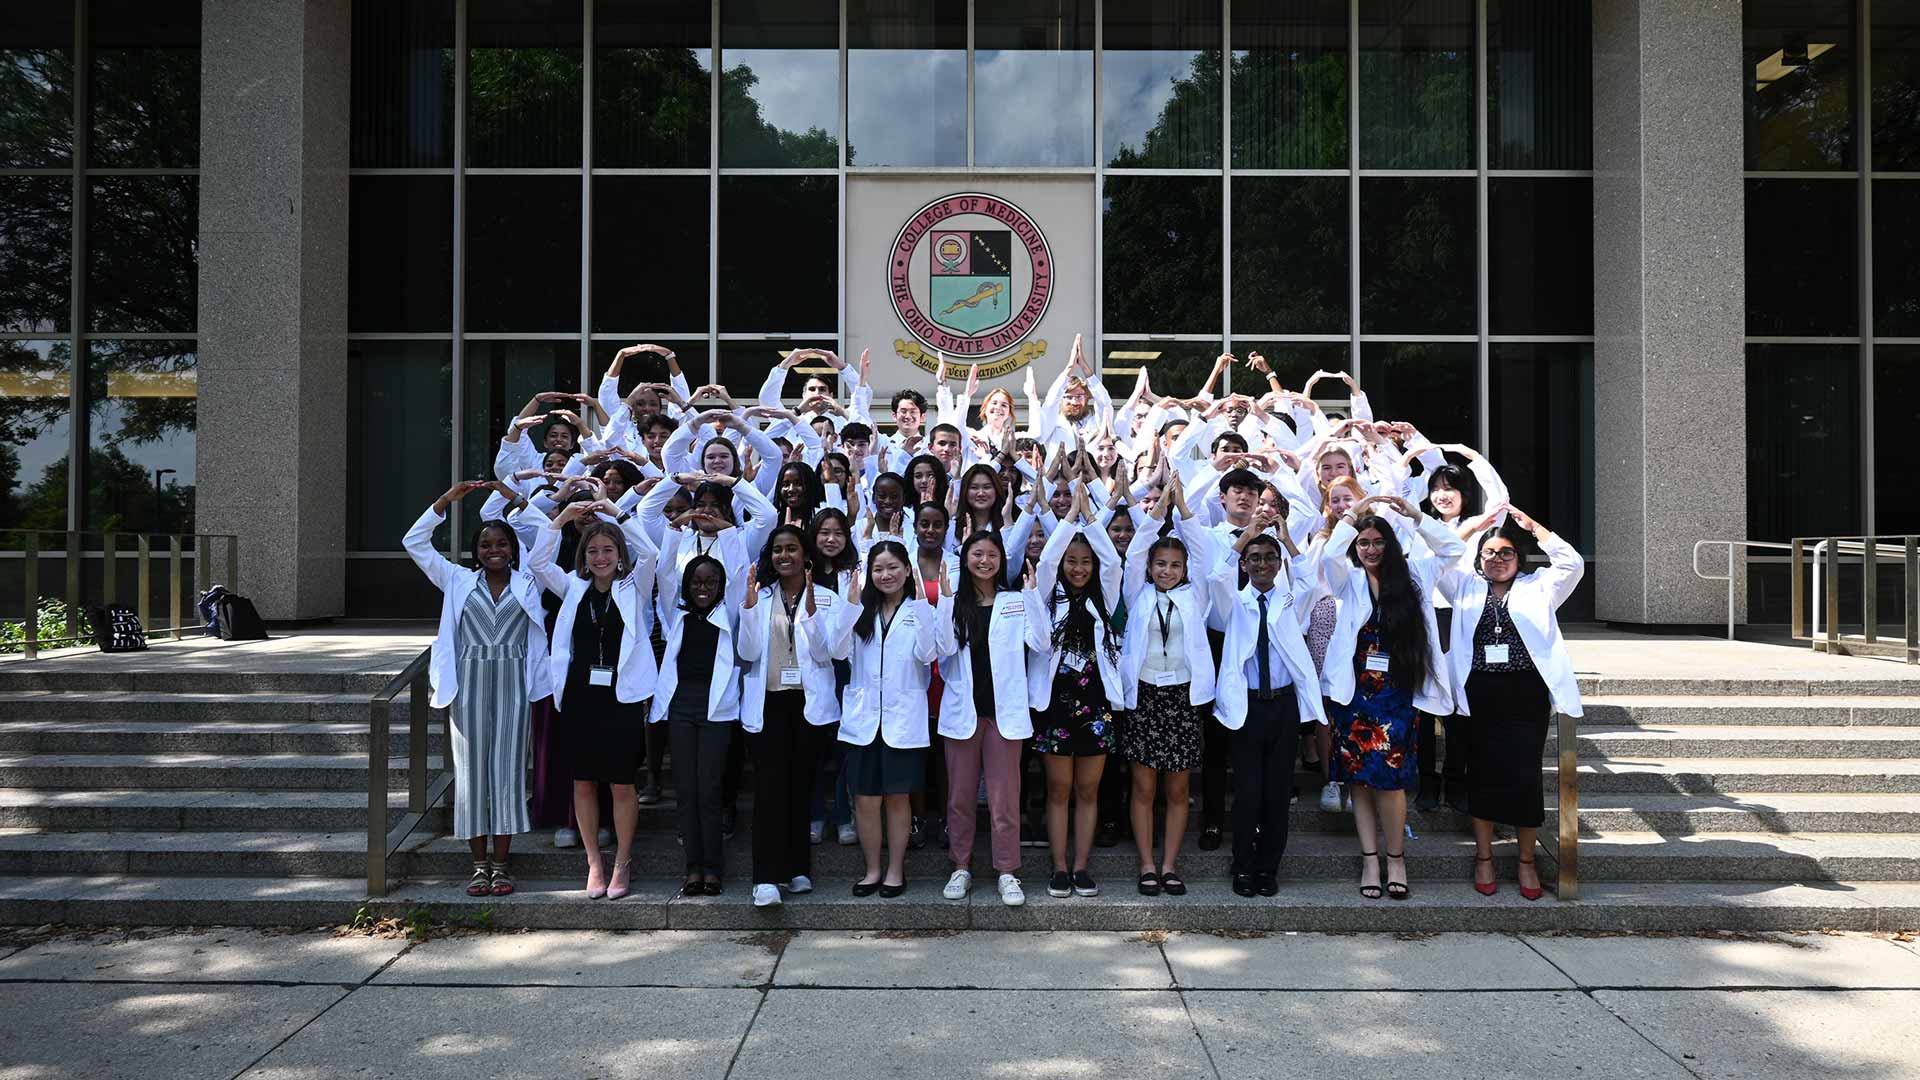 MD Camp participants in front of the Ohio State College of Medicine building